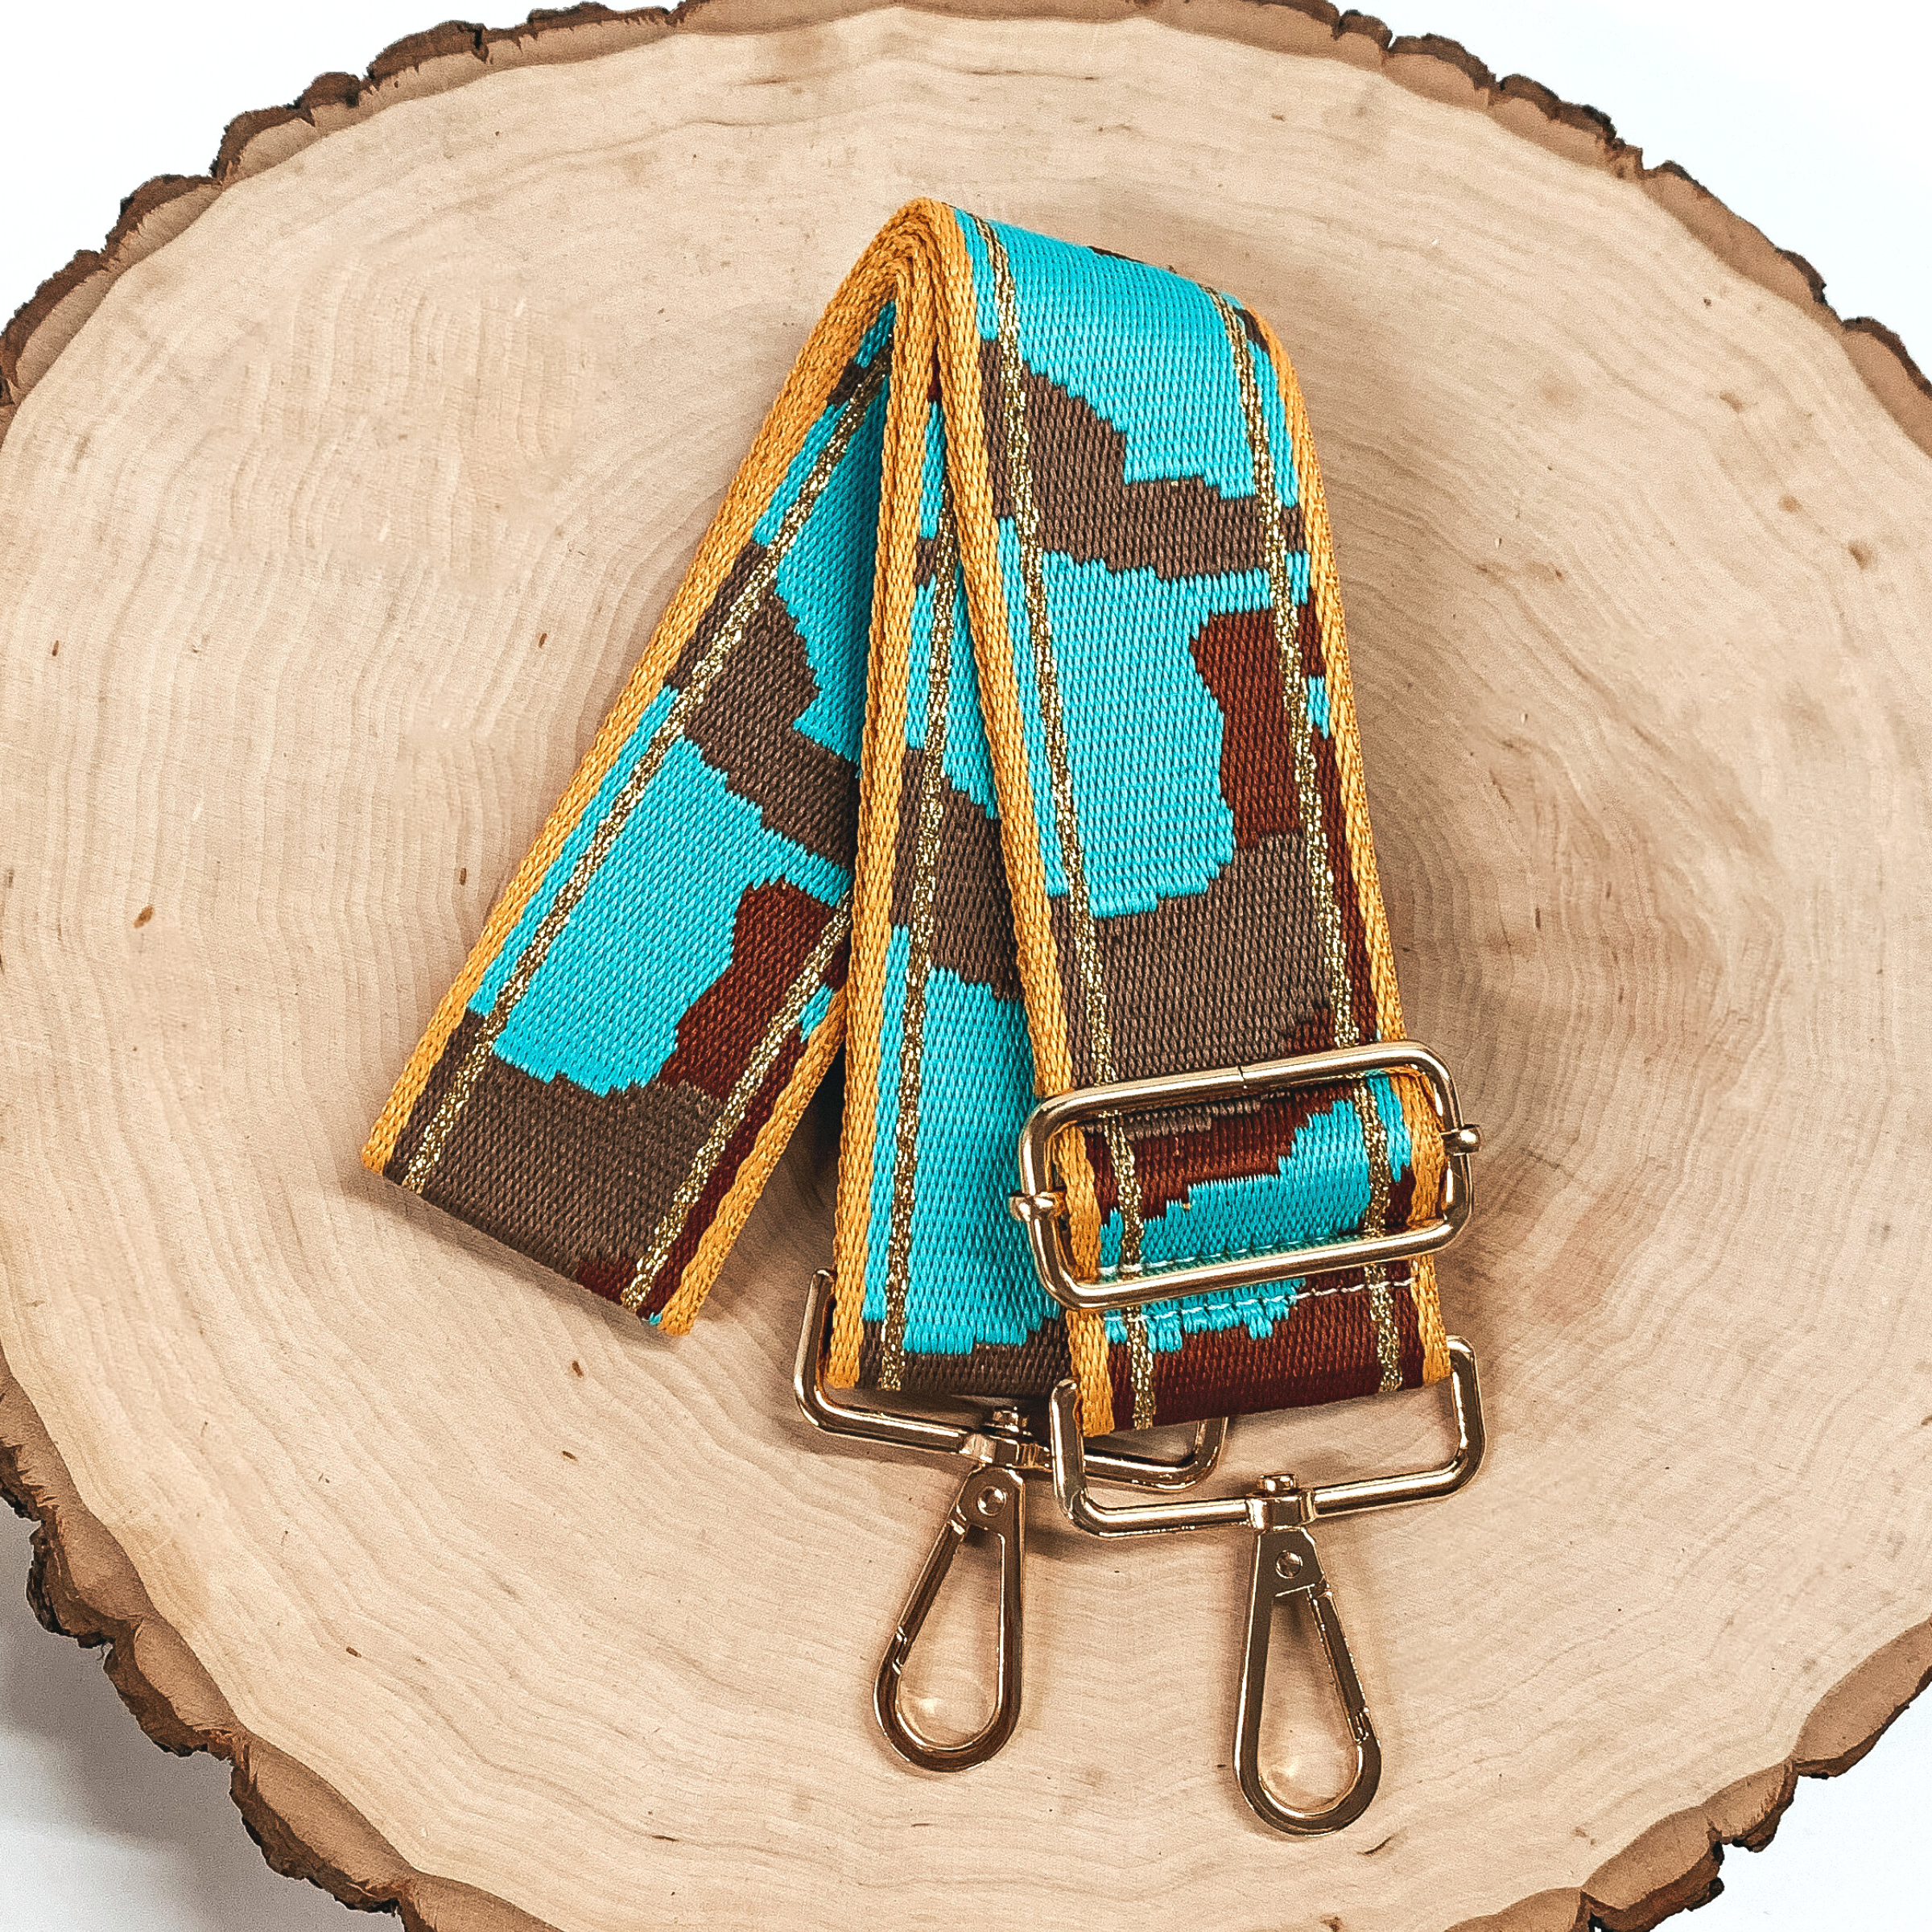 Camo Print Adjustable Purse Strap in Brown and Teal Mix